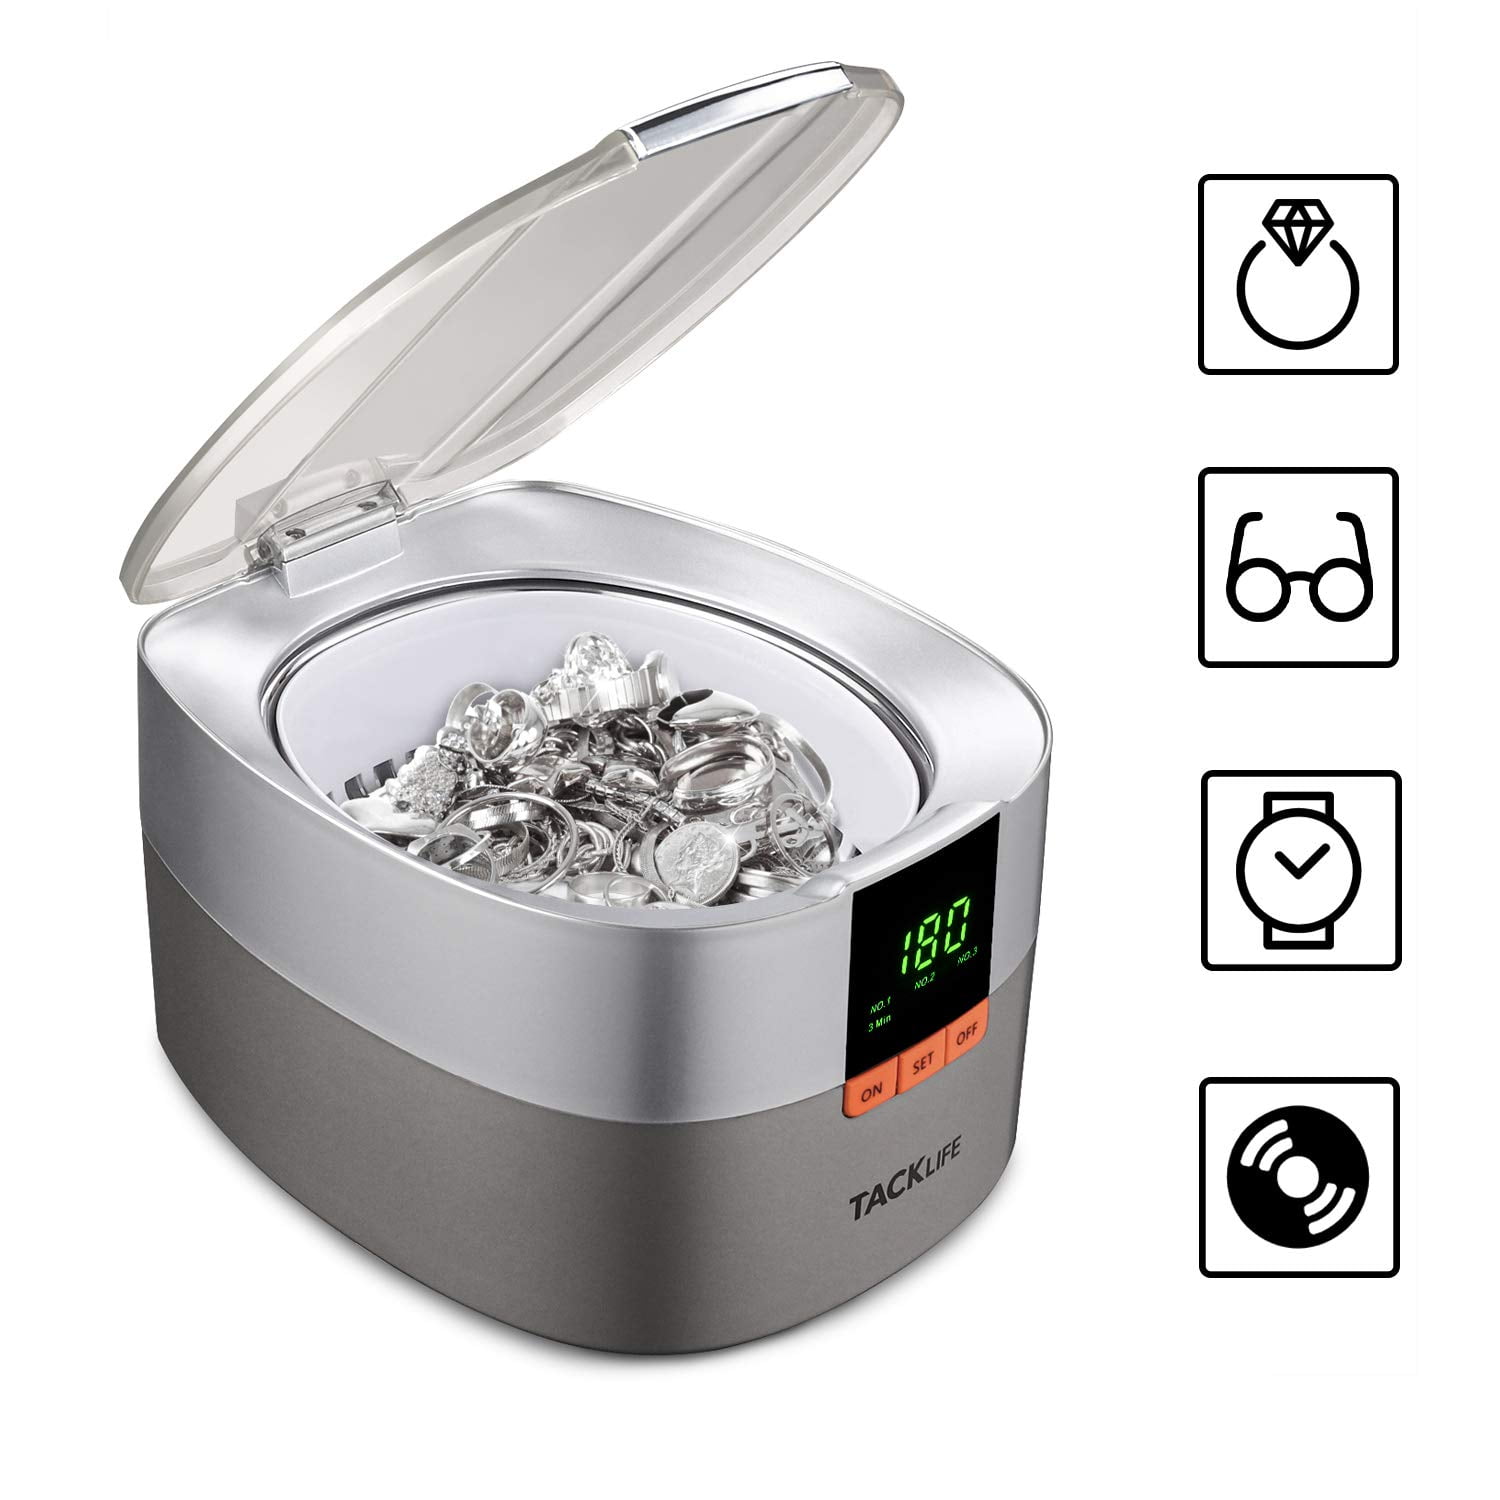 Ultrasonic Cleaner tacklife muc02 Professional 600 ml Ultrasonic Jewelry Cleaner Household Ultrasonic Cleaning máquina with 5 Time Setting for Cleaning eye-glasses Utensils and more Watches 